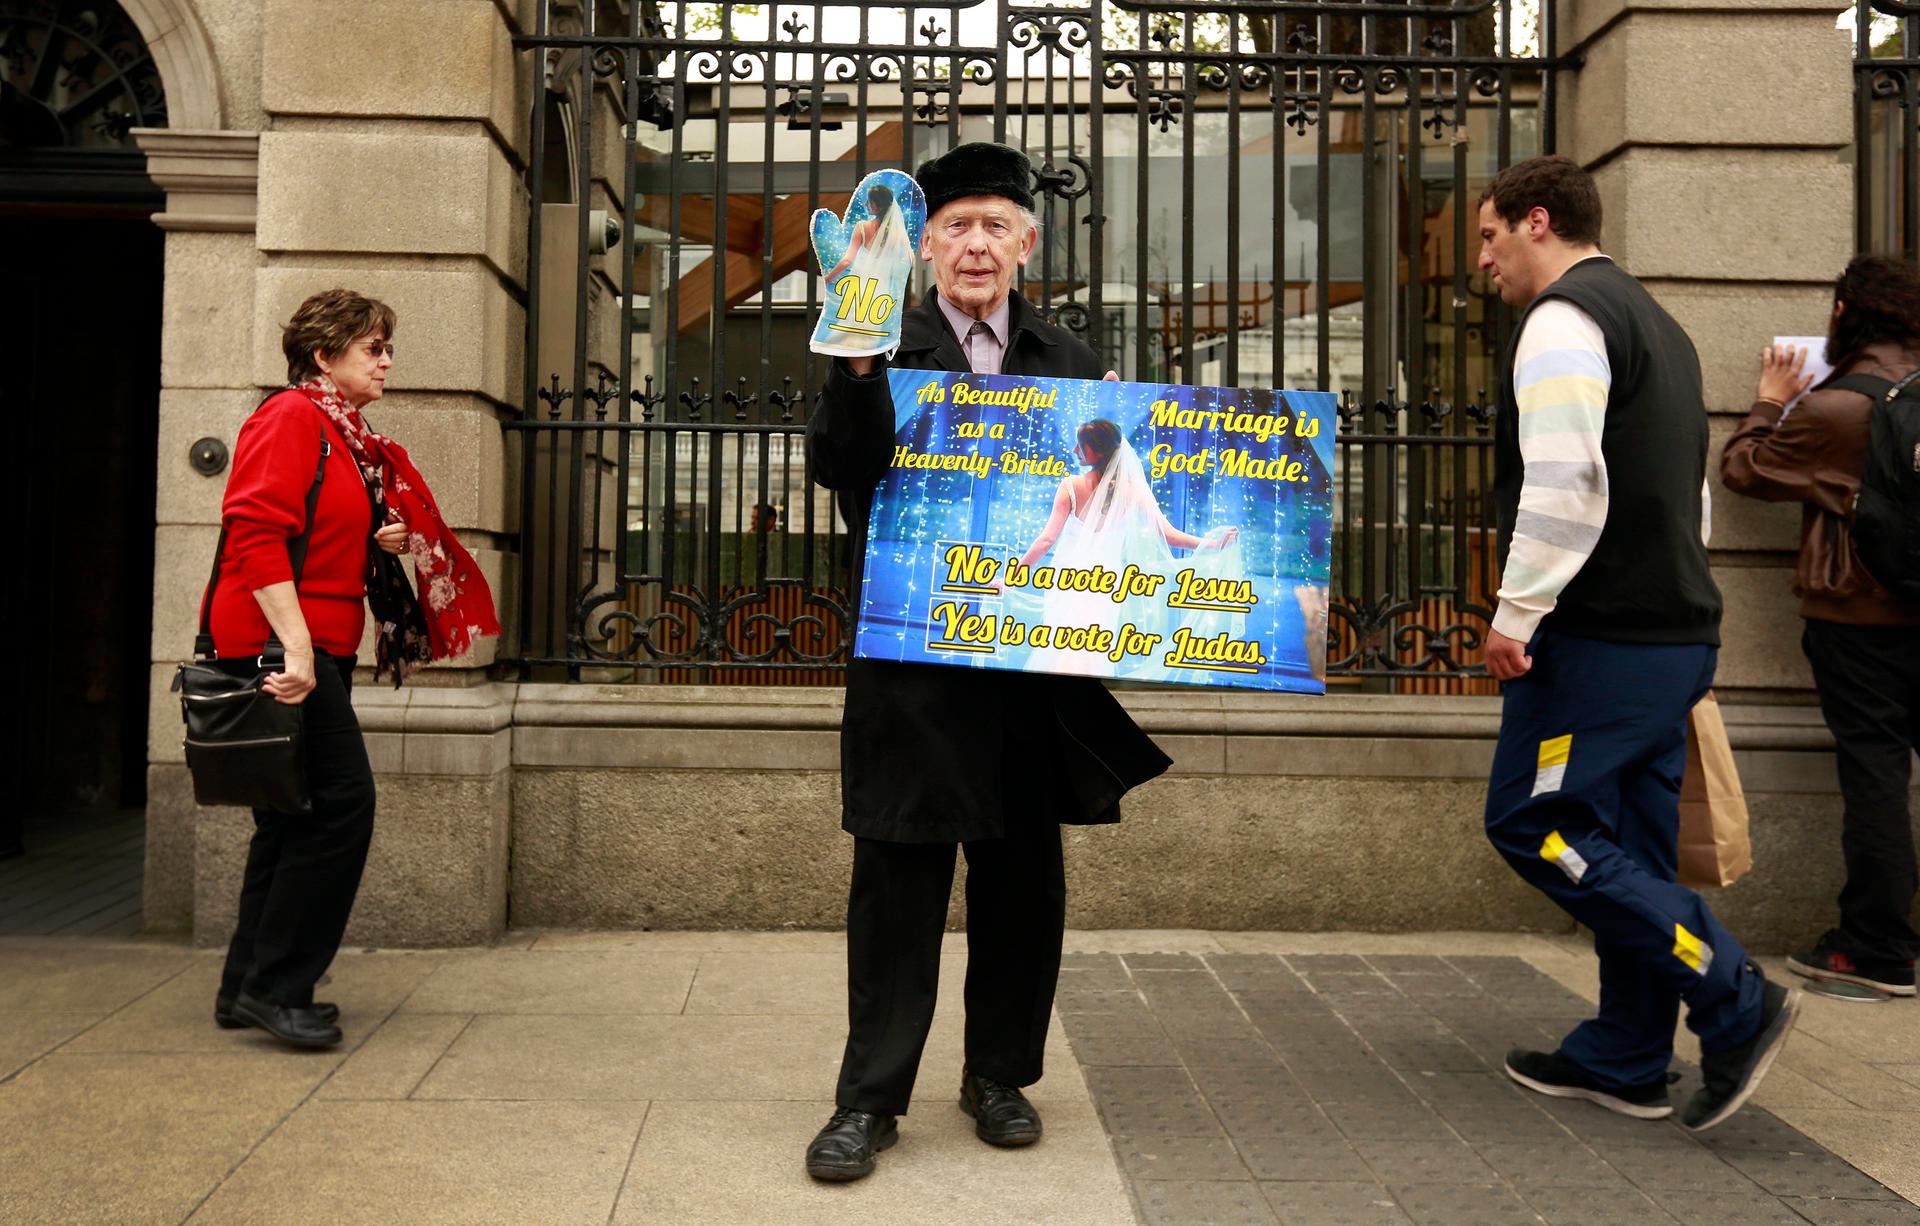 A ‘No’ campaigner, opposed to the legalization of same-sex marriage, delivers his message on the sidewalk in Dublin on May 20, 2015.